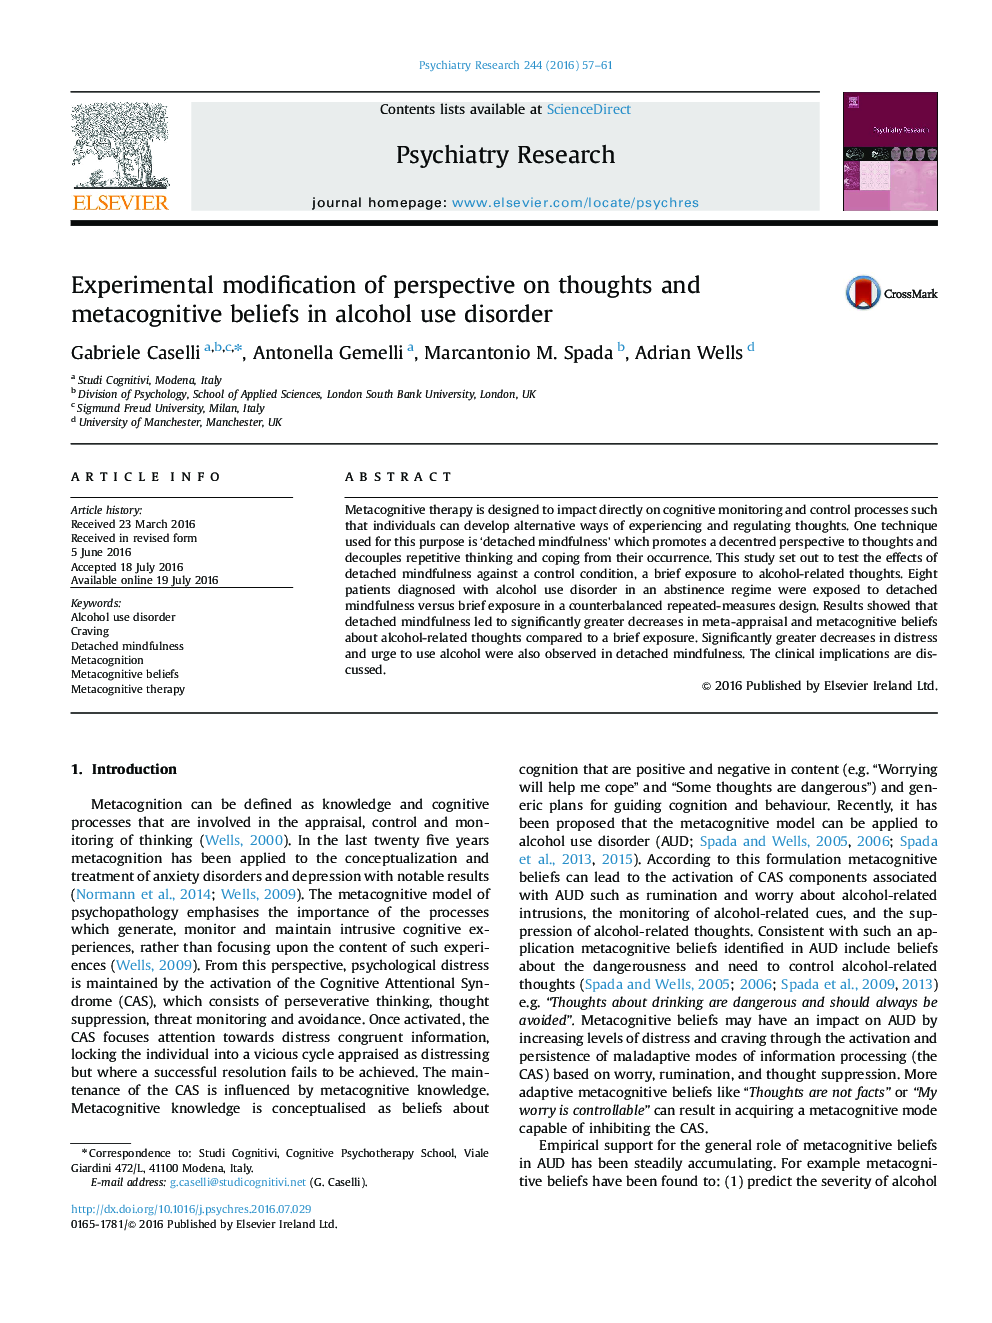 Experimental modification of perspective on thoughts and metacognitive beliefs in alcohol use disorder